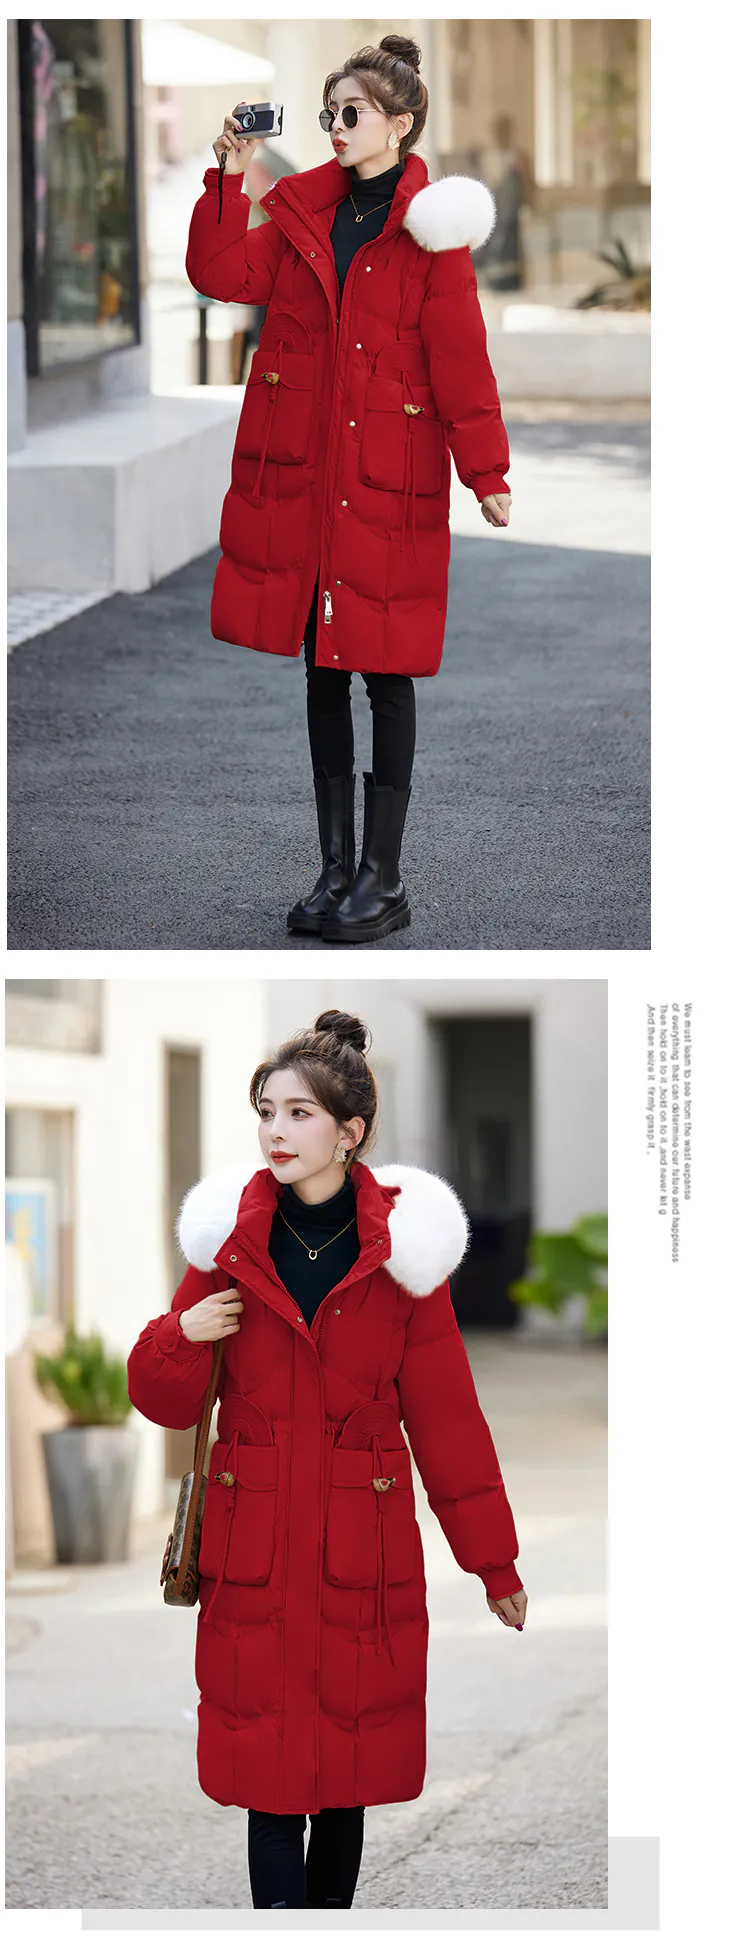 Fashion-Faux-Fur-Hooded-Solid-Color-Winter-Coat-Outdoor-Parka17